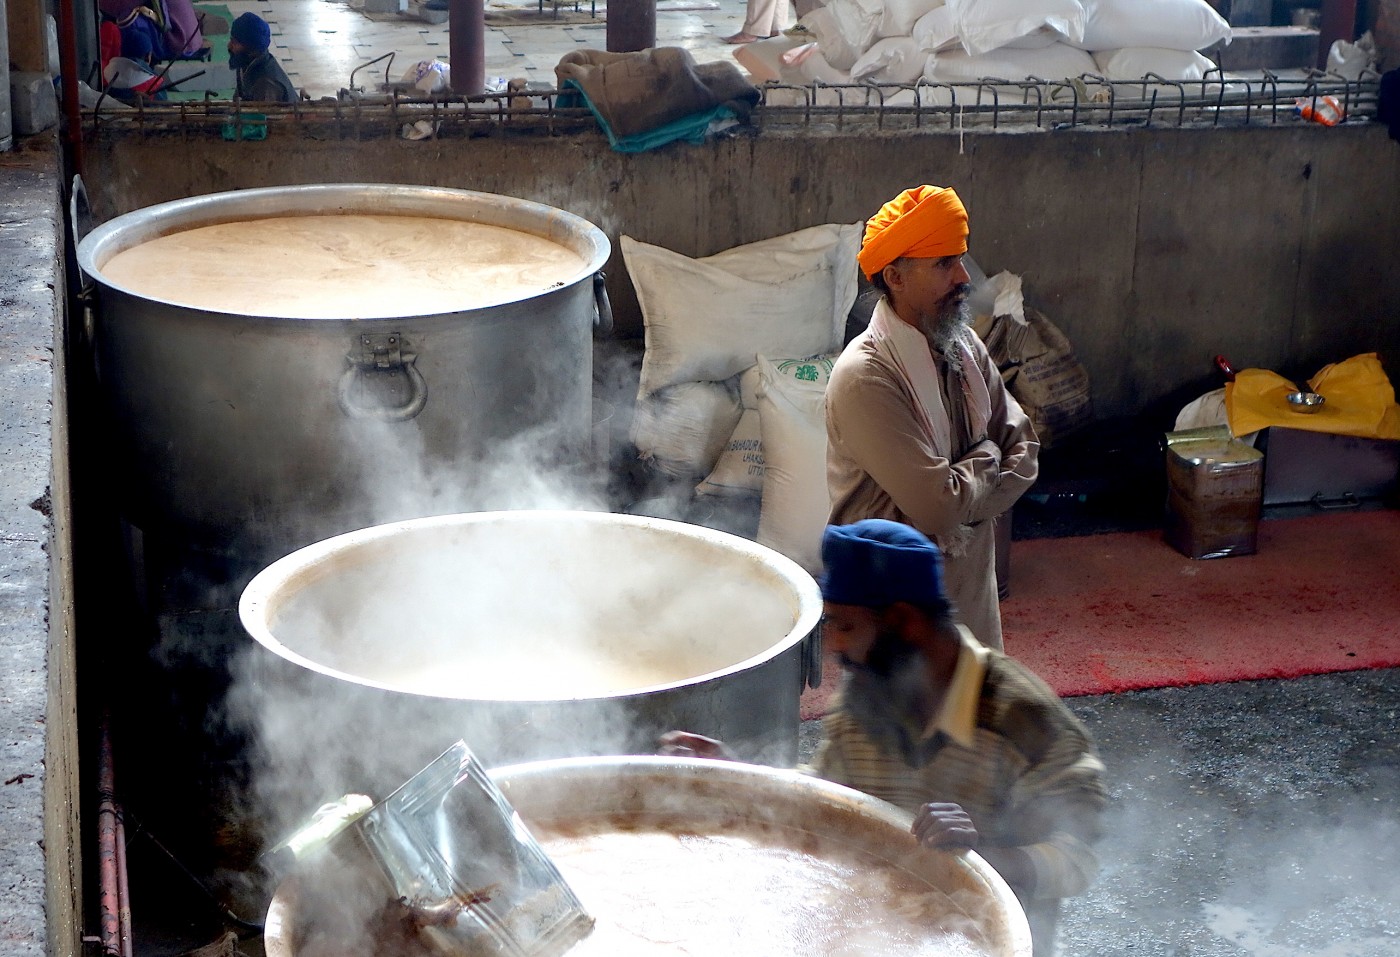 A cook in the Golden Temple cooks in an extremely large pot